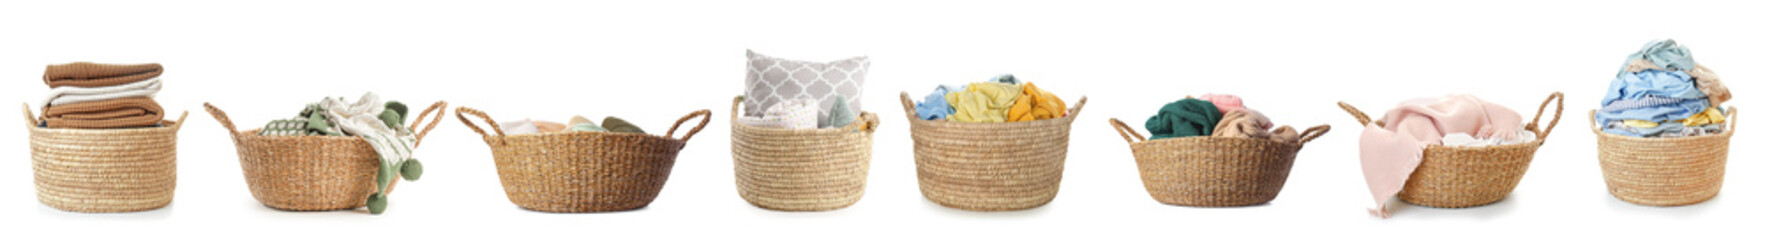 Set of wicker baskets with laundry isolated on white